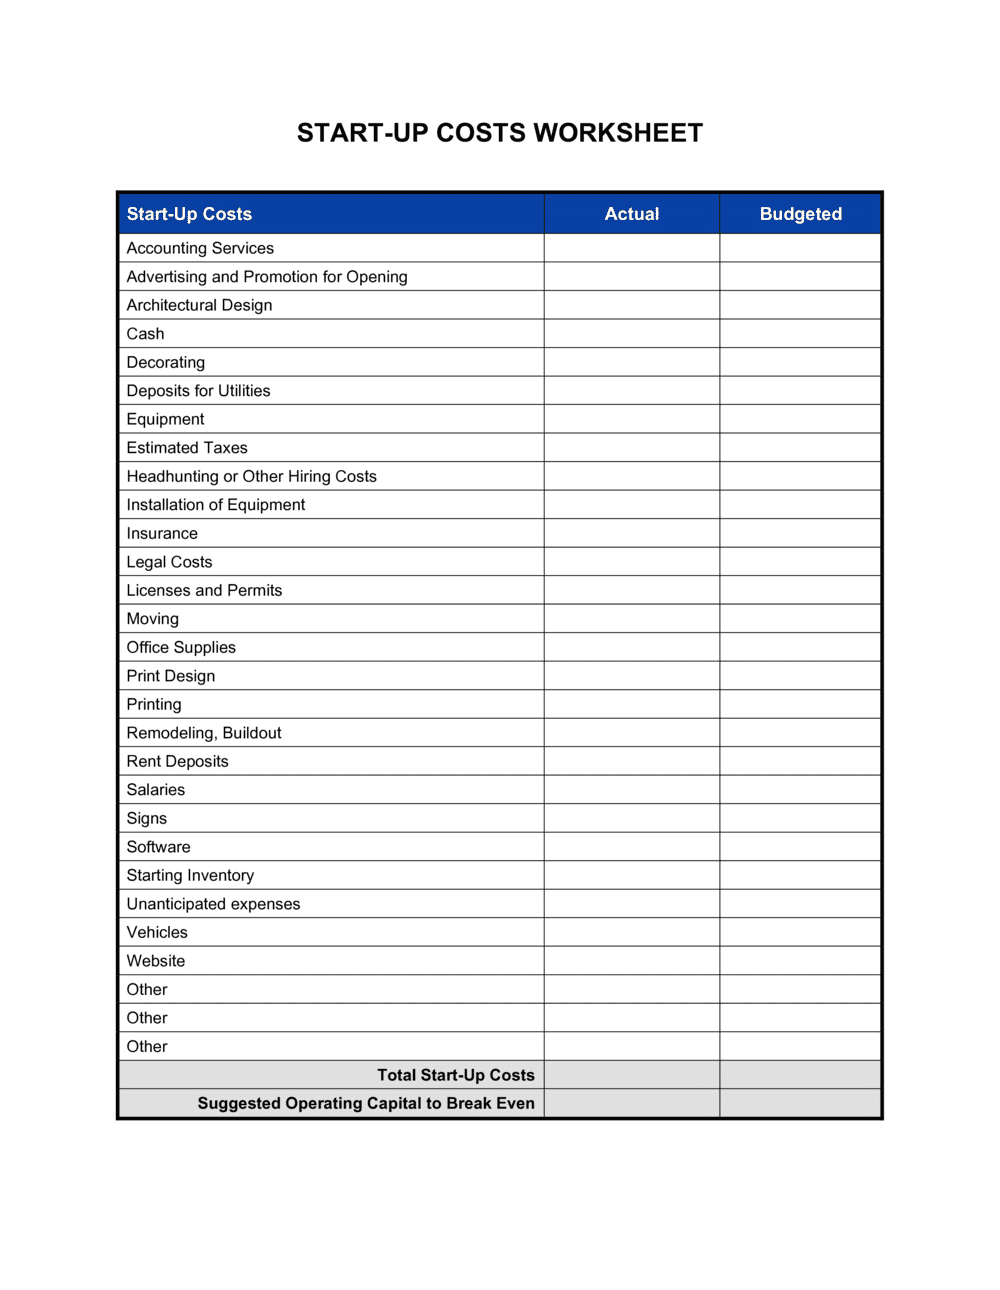 Worksheet_StartUp Costs Template by BusinessinaBox™